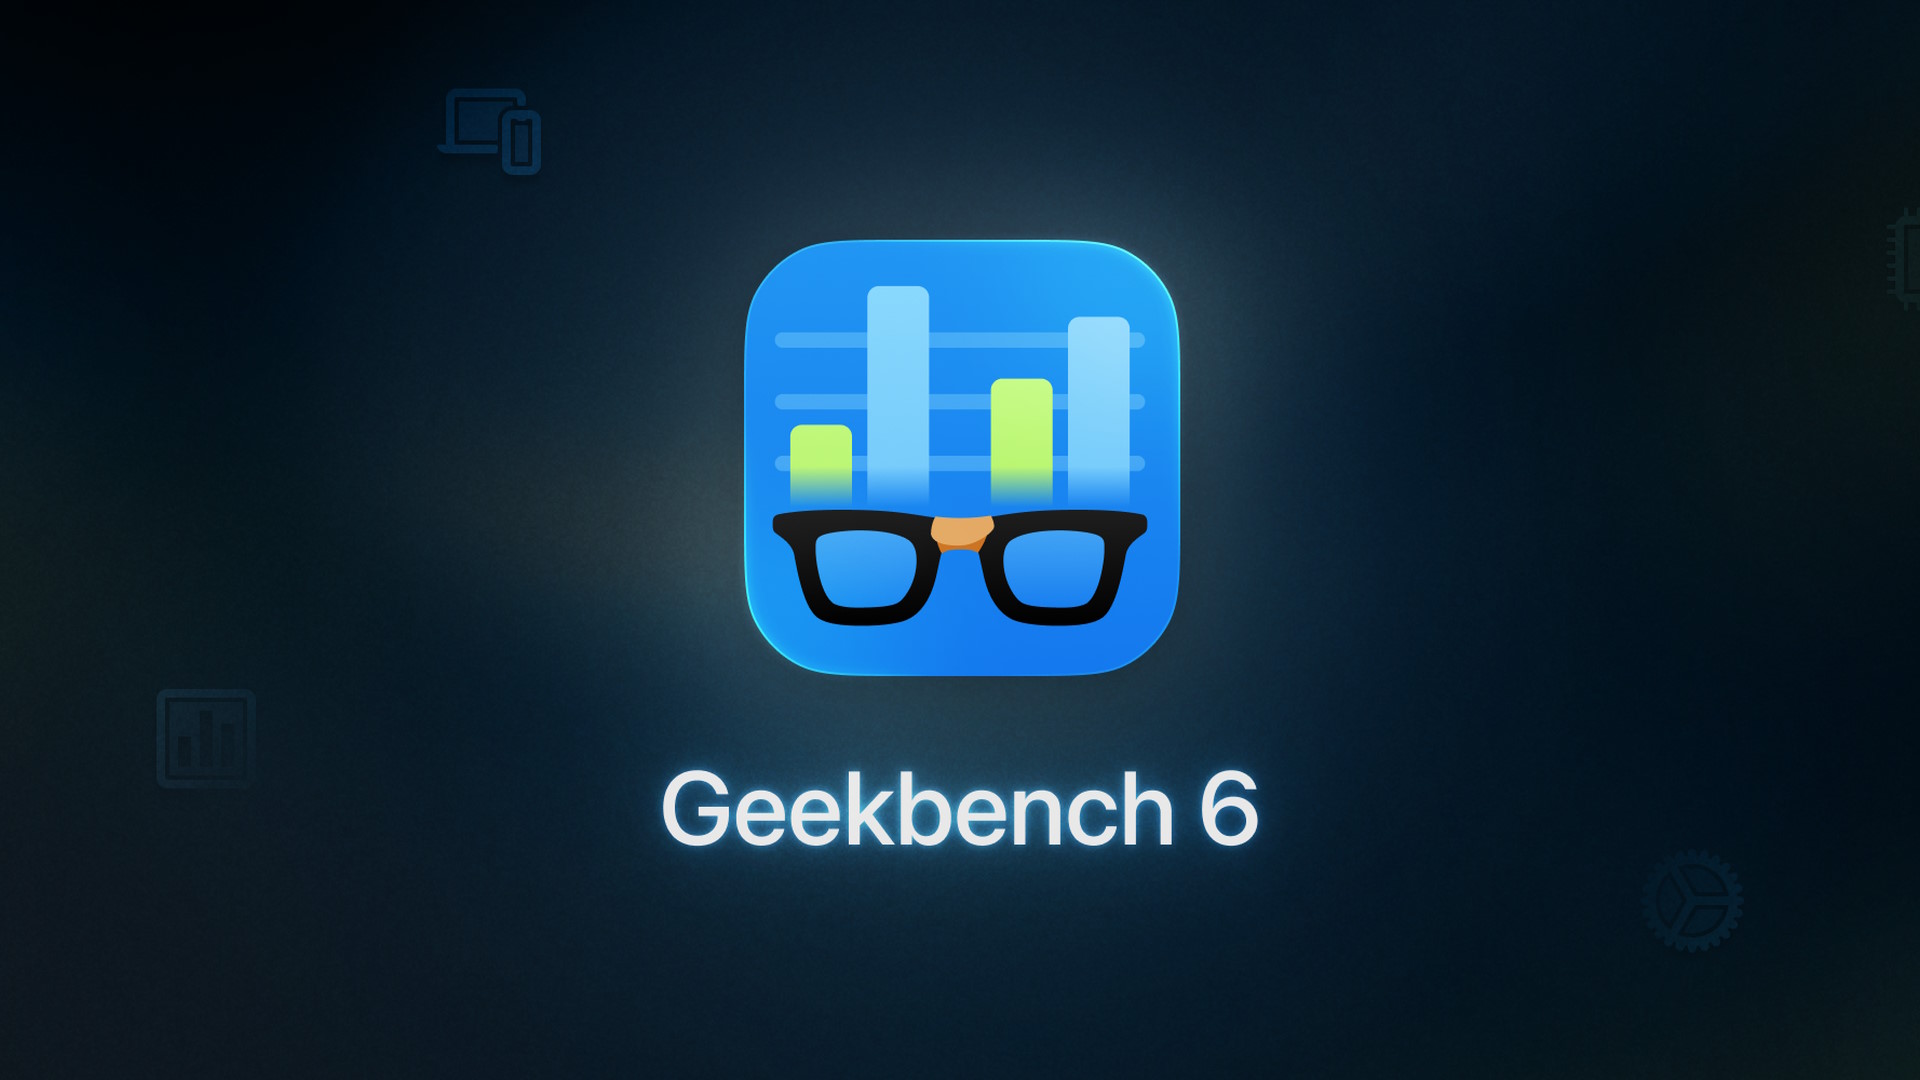 Geekbench 6 banner and logo